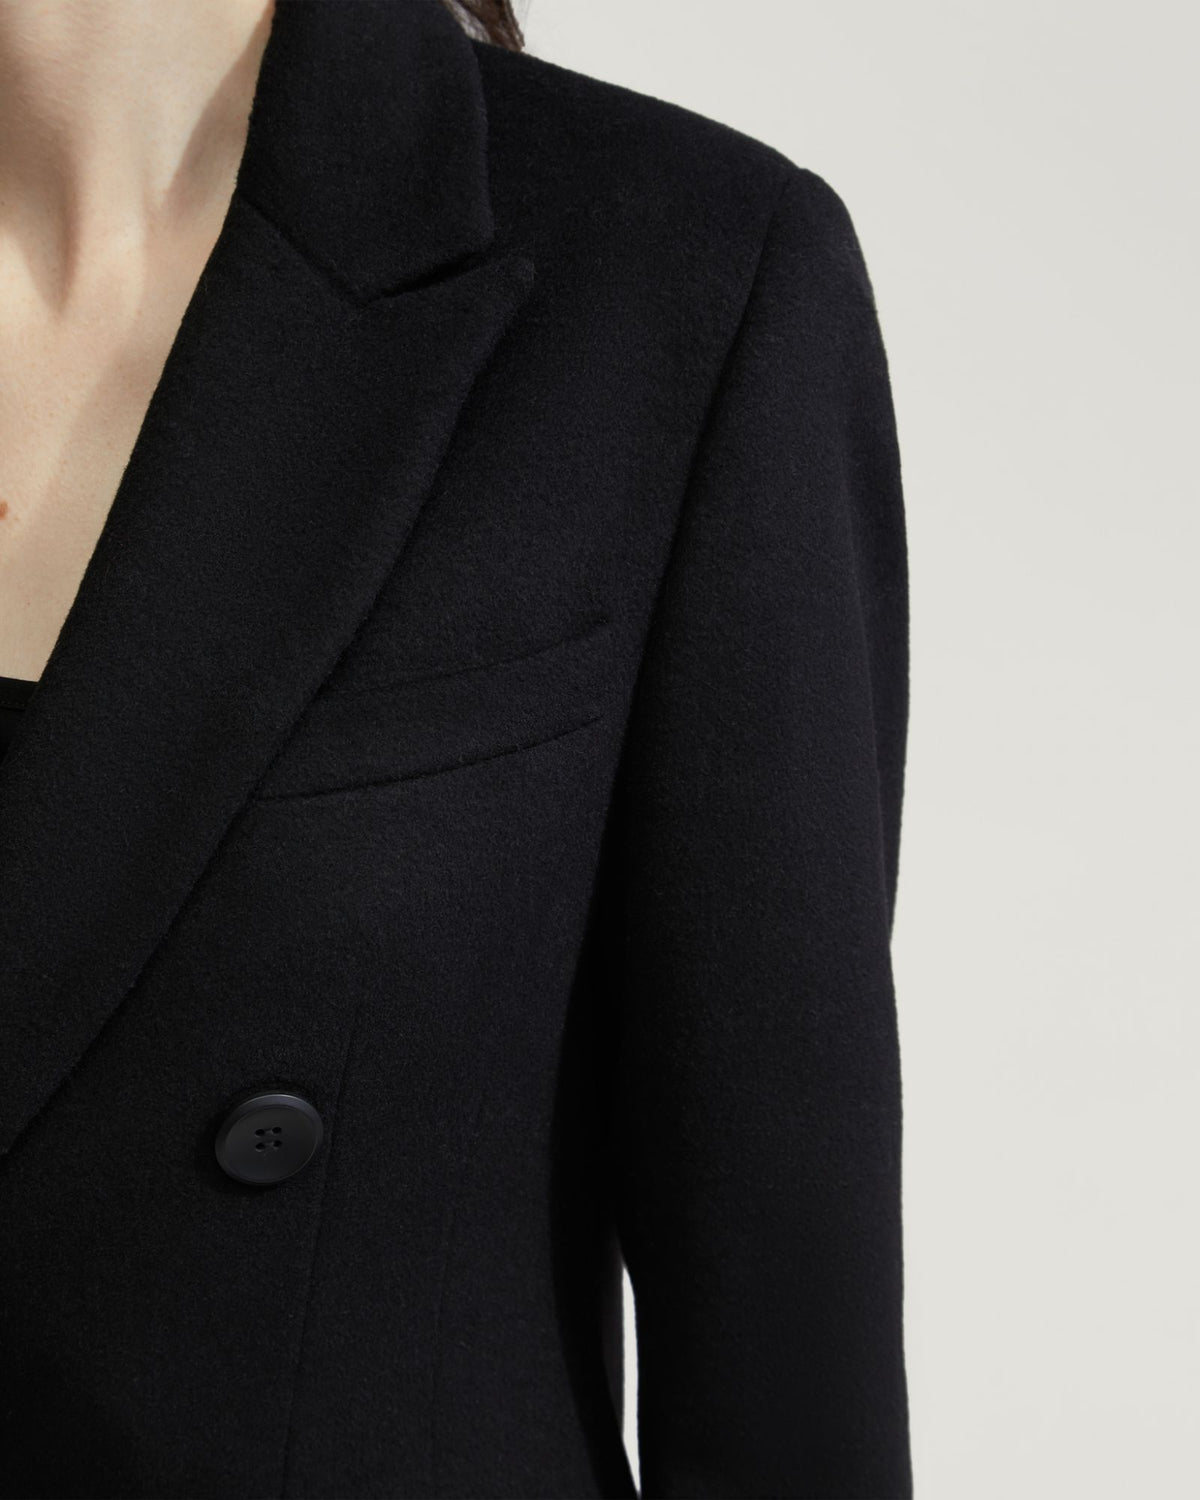 LILY WOOL RICH COAT - AVAILABLE ~ 1-2 weeks WOMENS SUITS JKTS COATS